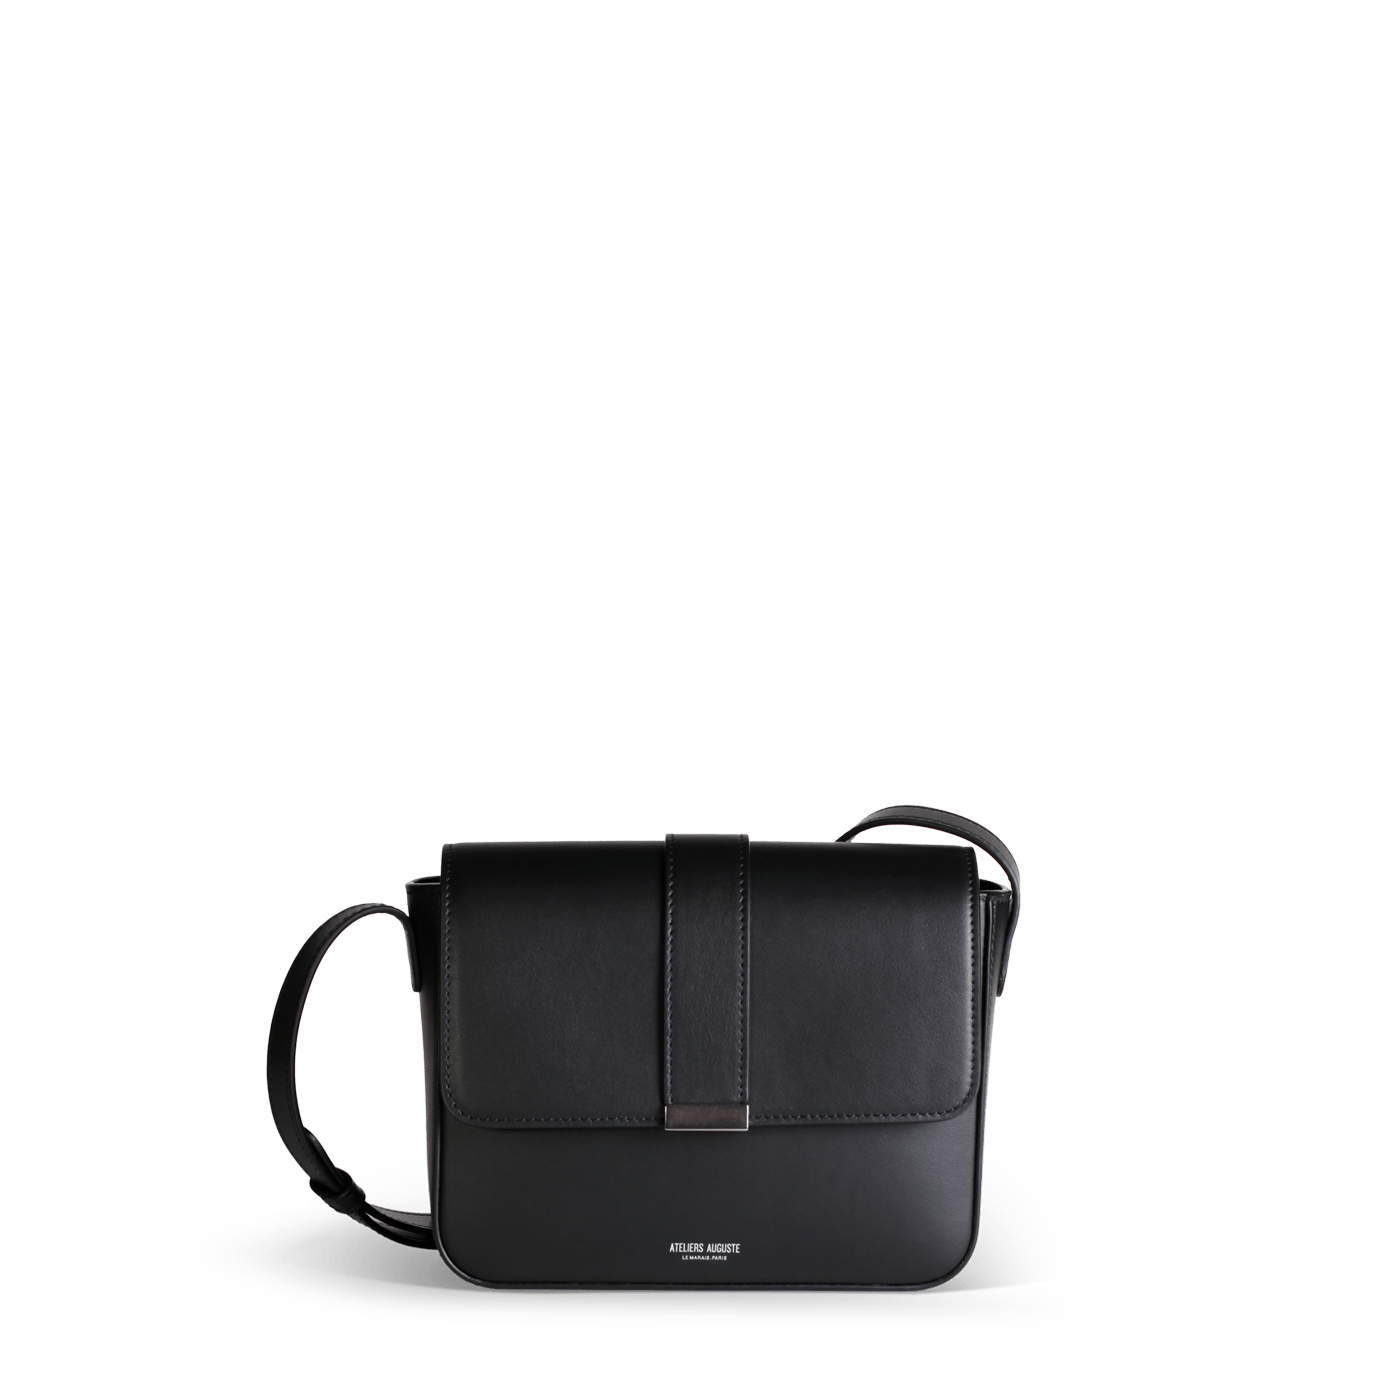 Mini Monceau Silver Edition - Black Smooth Leather